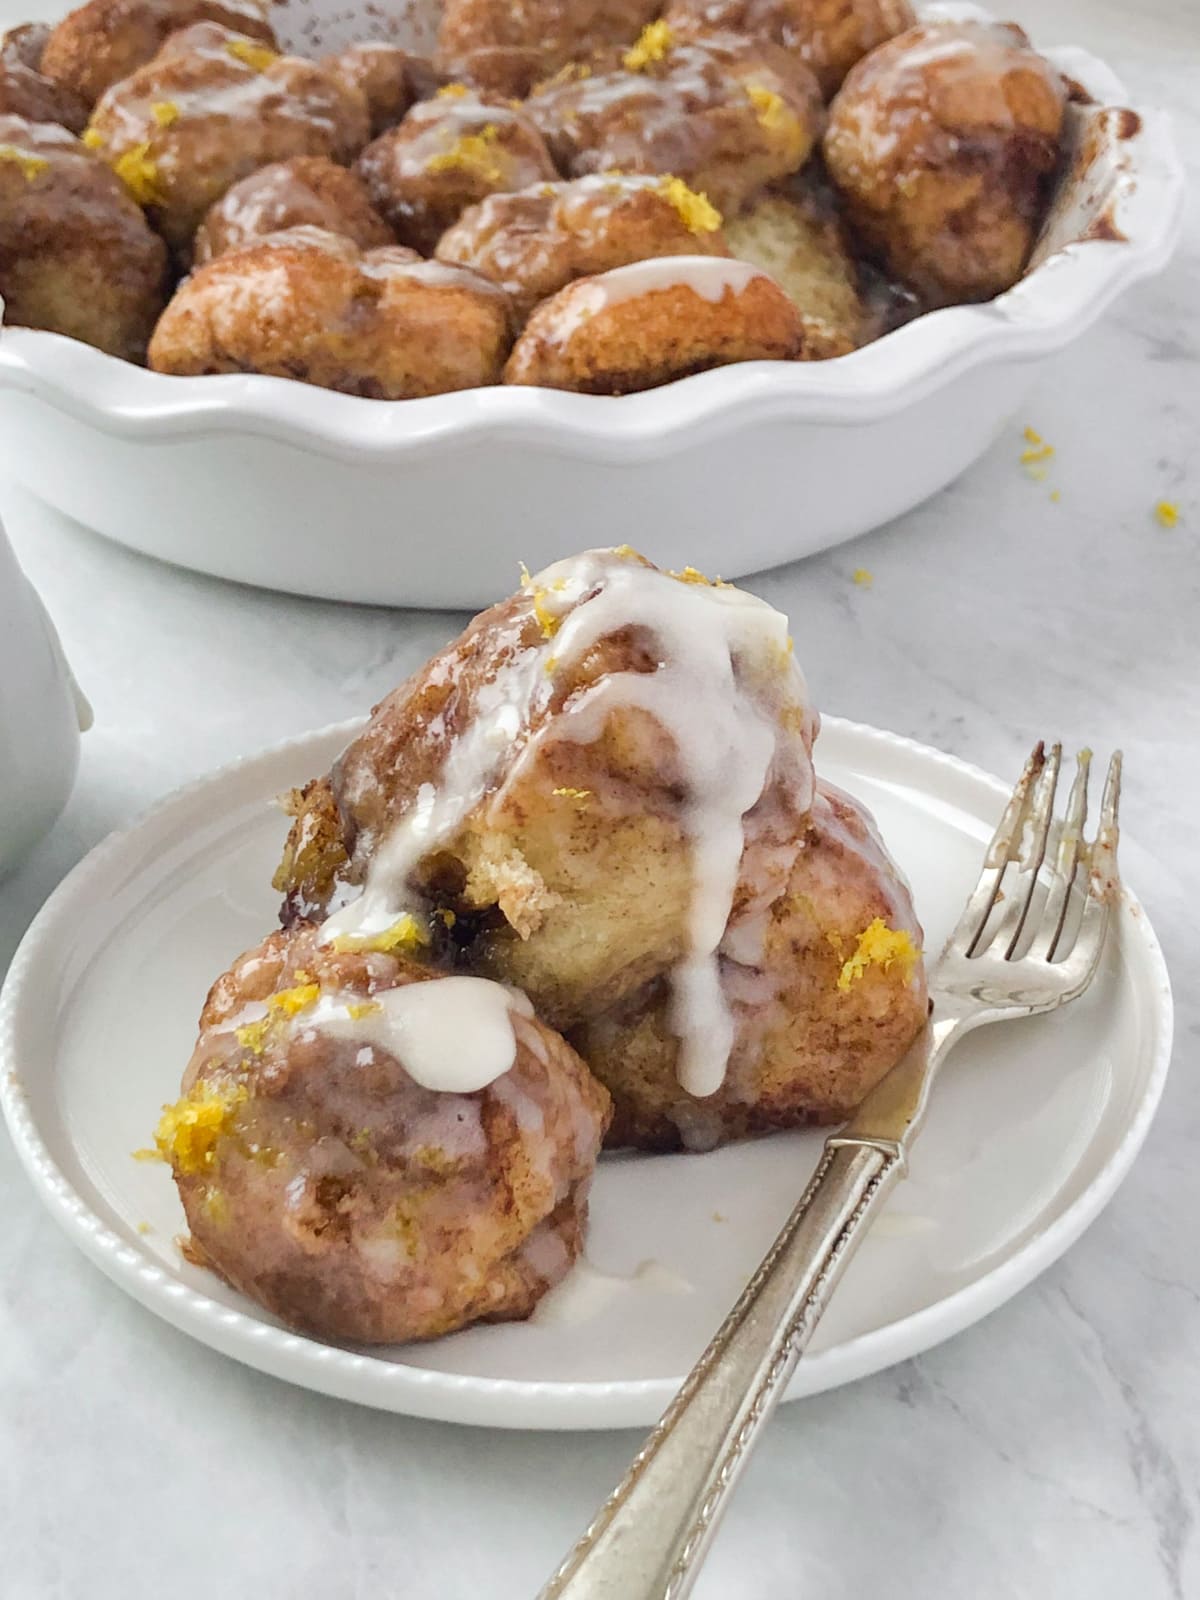 Cinnamon bites drizzled with icing sitting on a white plate in front of a pan of monkey bread.